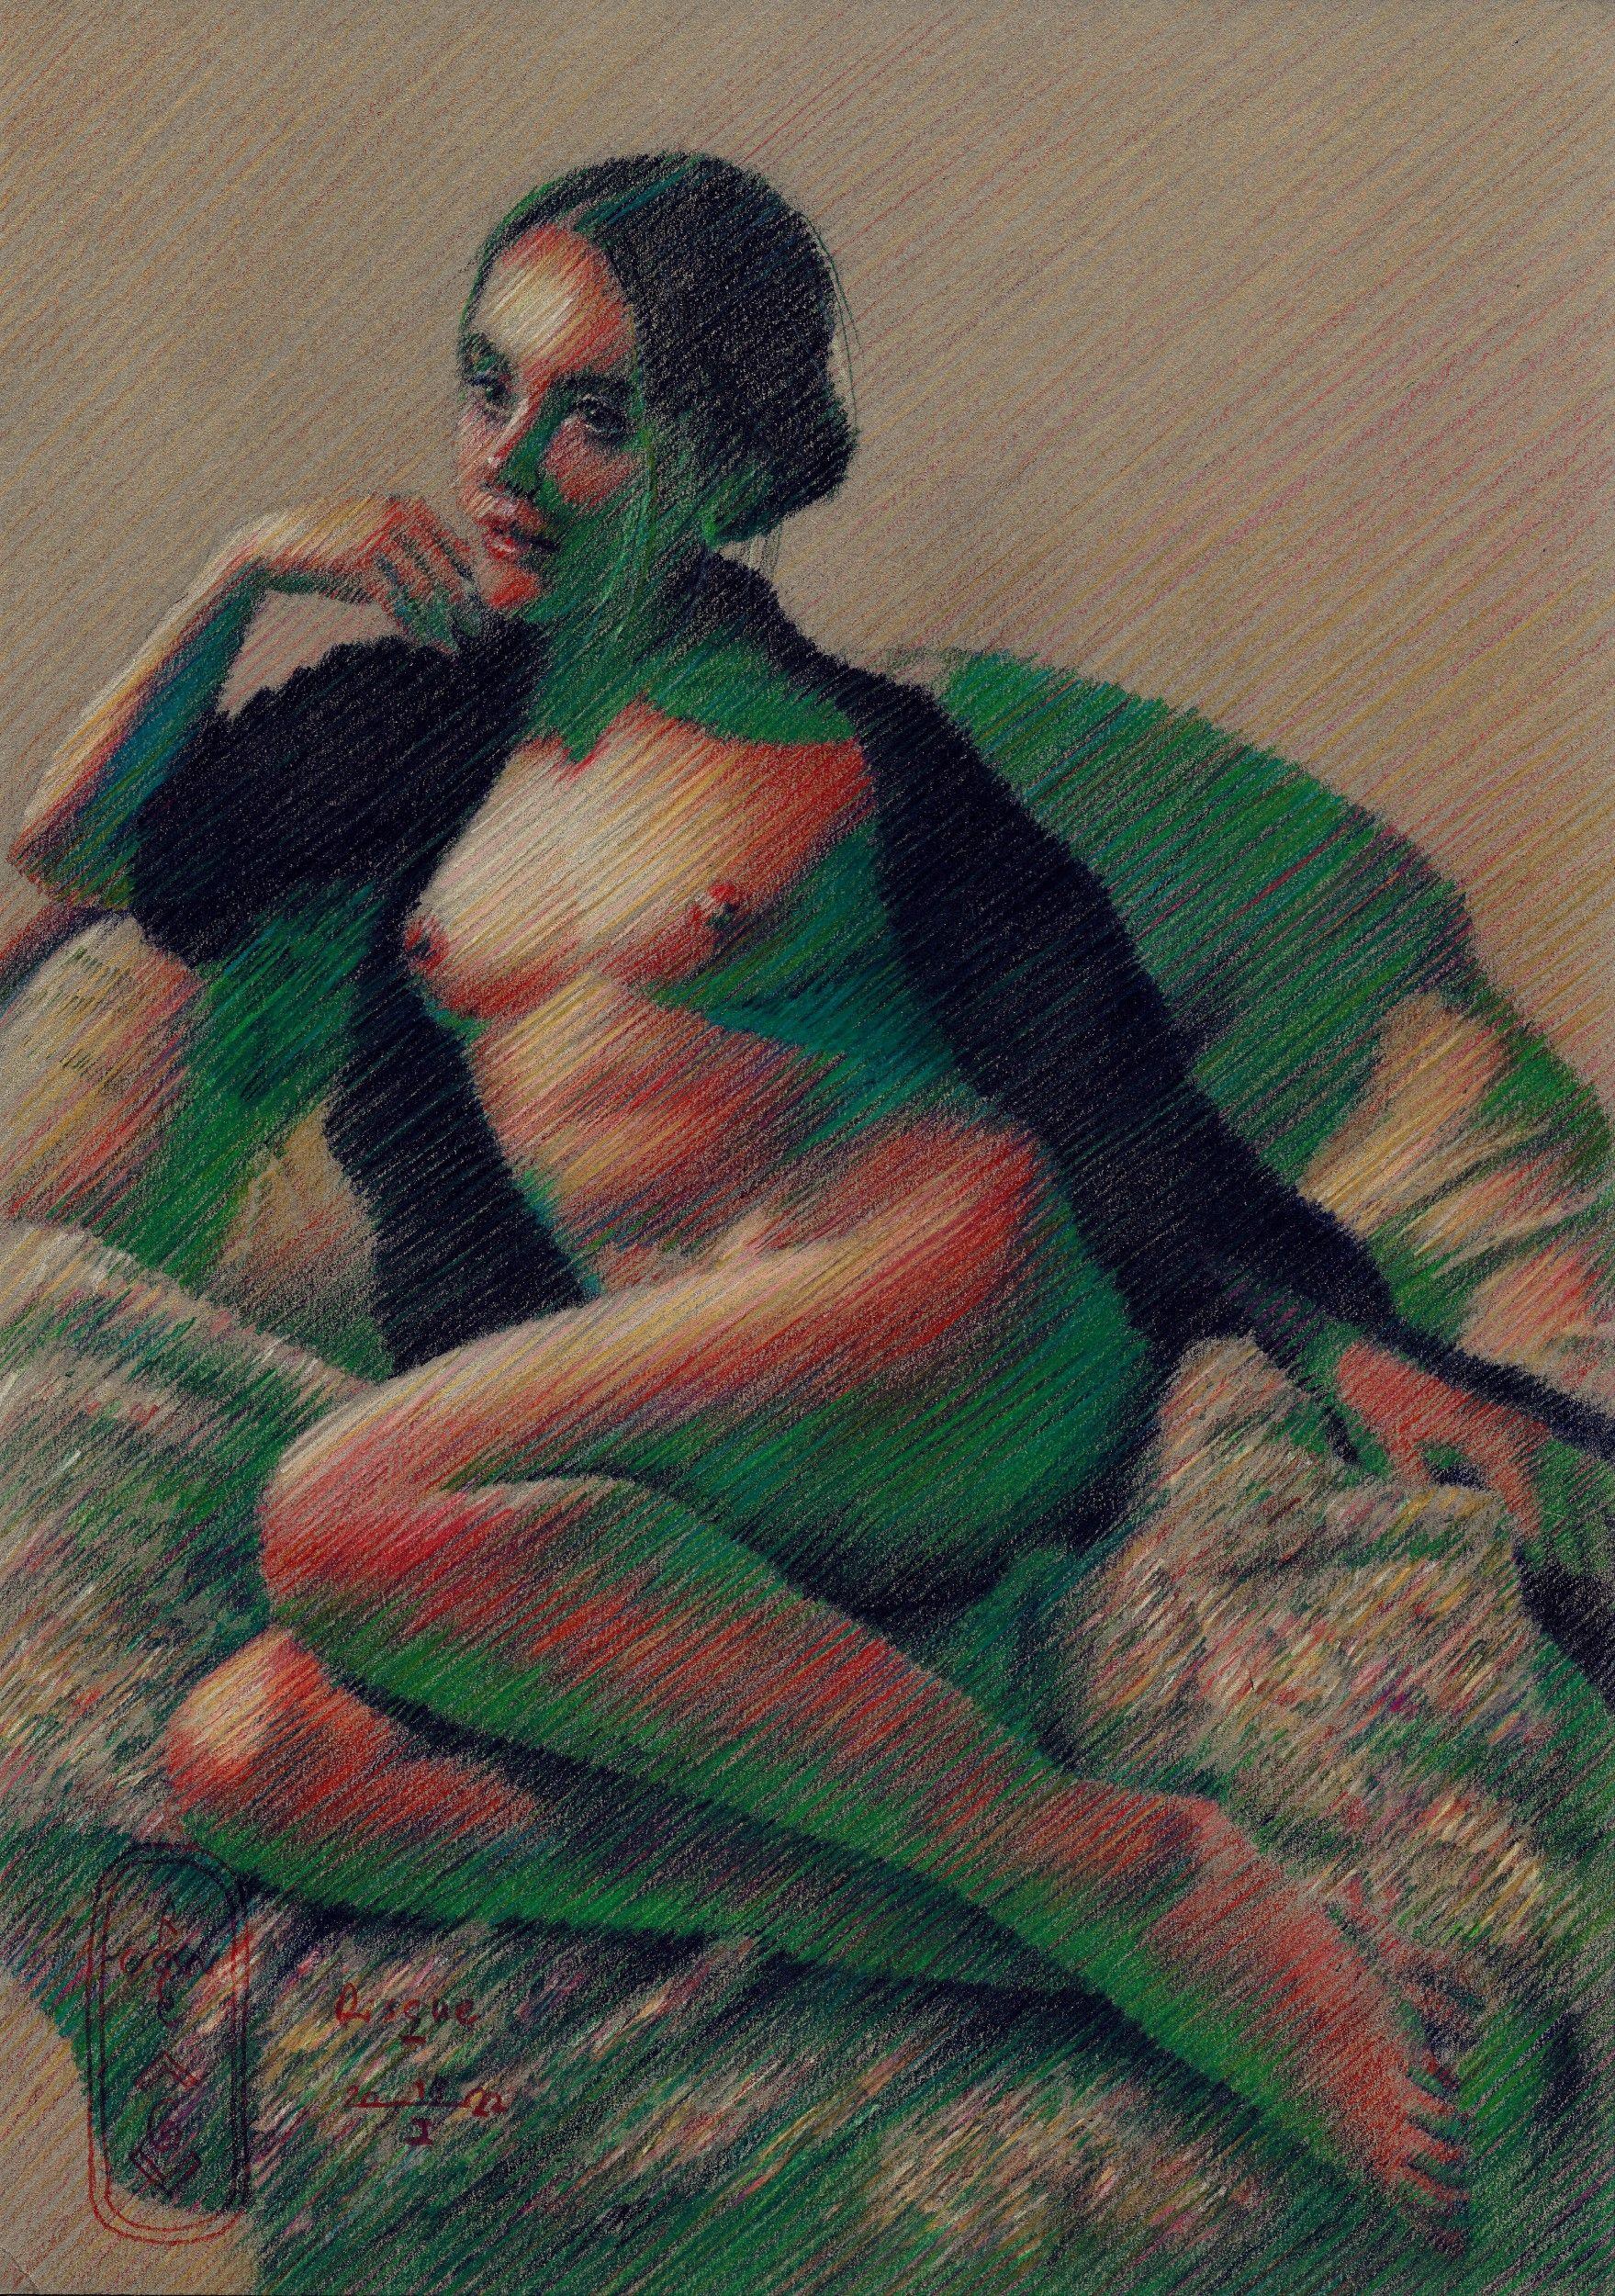 Risque â€“ 18-01-22, Drawing, Pencil/Colored Pencil on Paper - Art by Corne Akkers